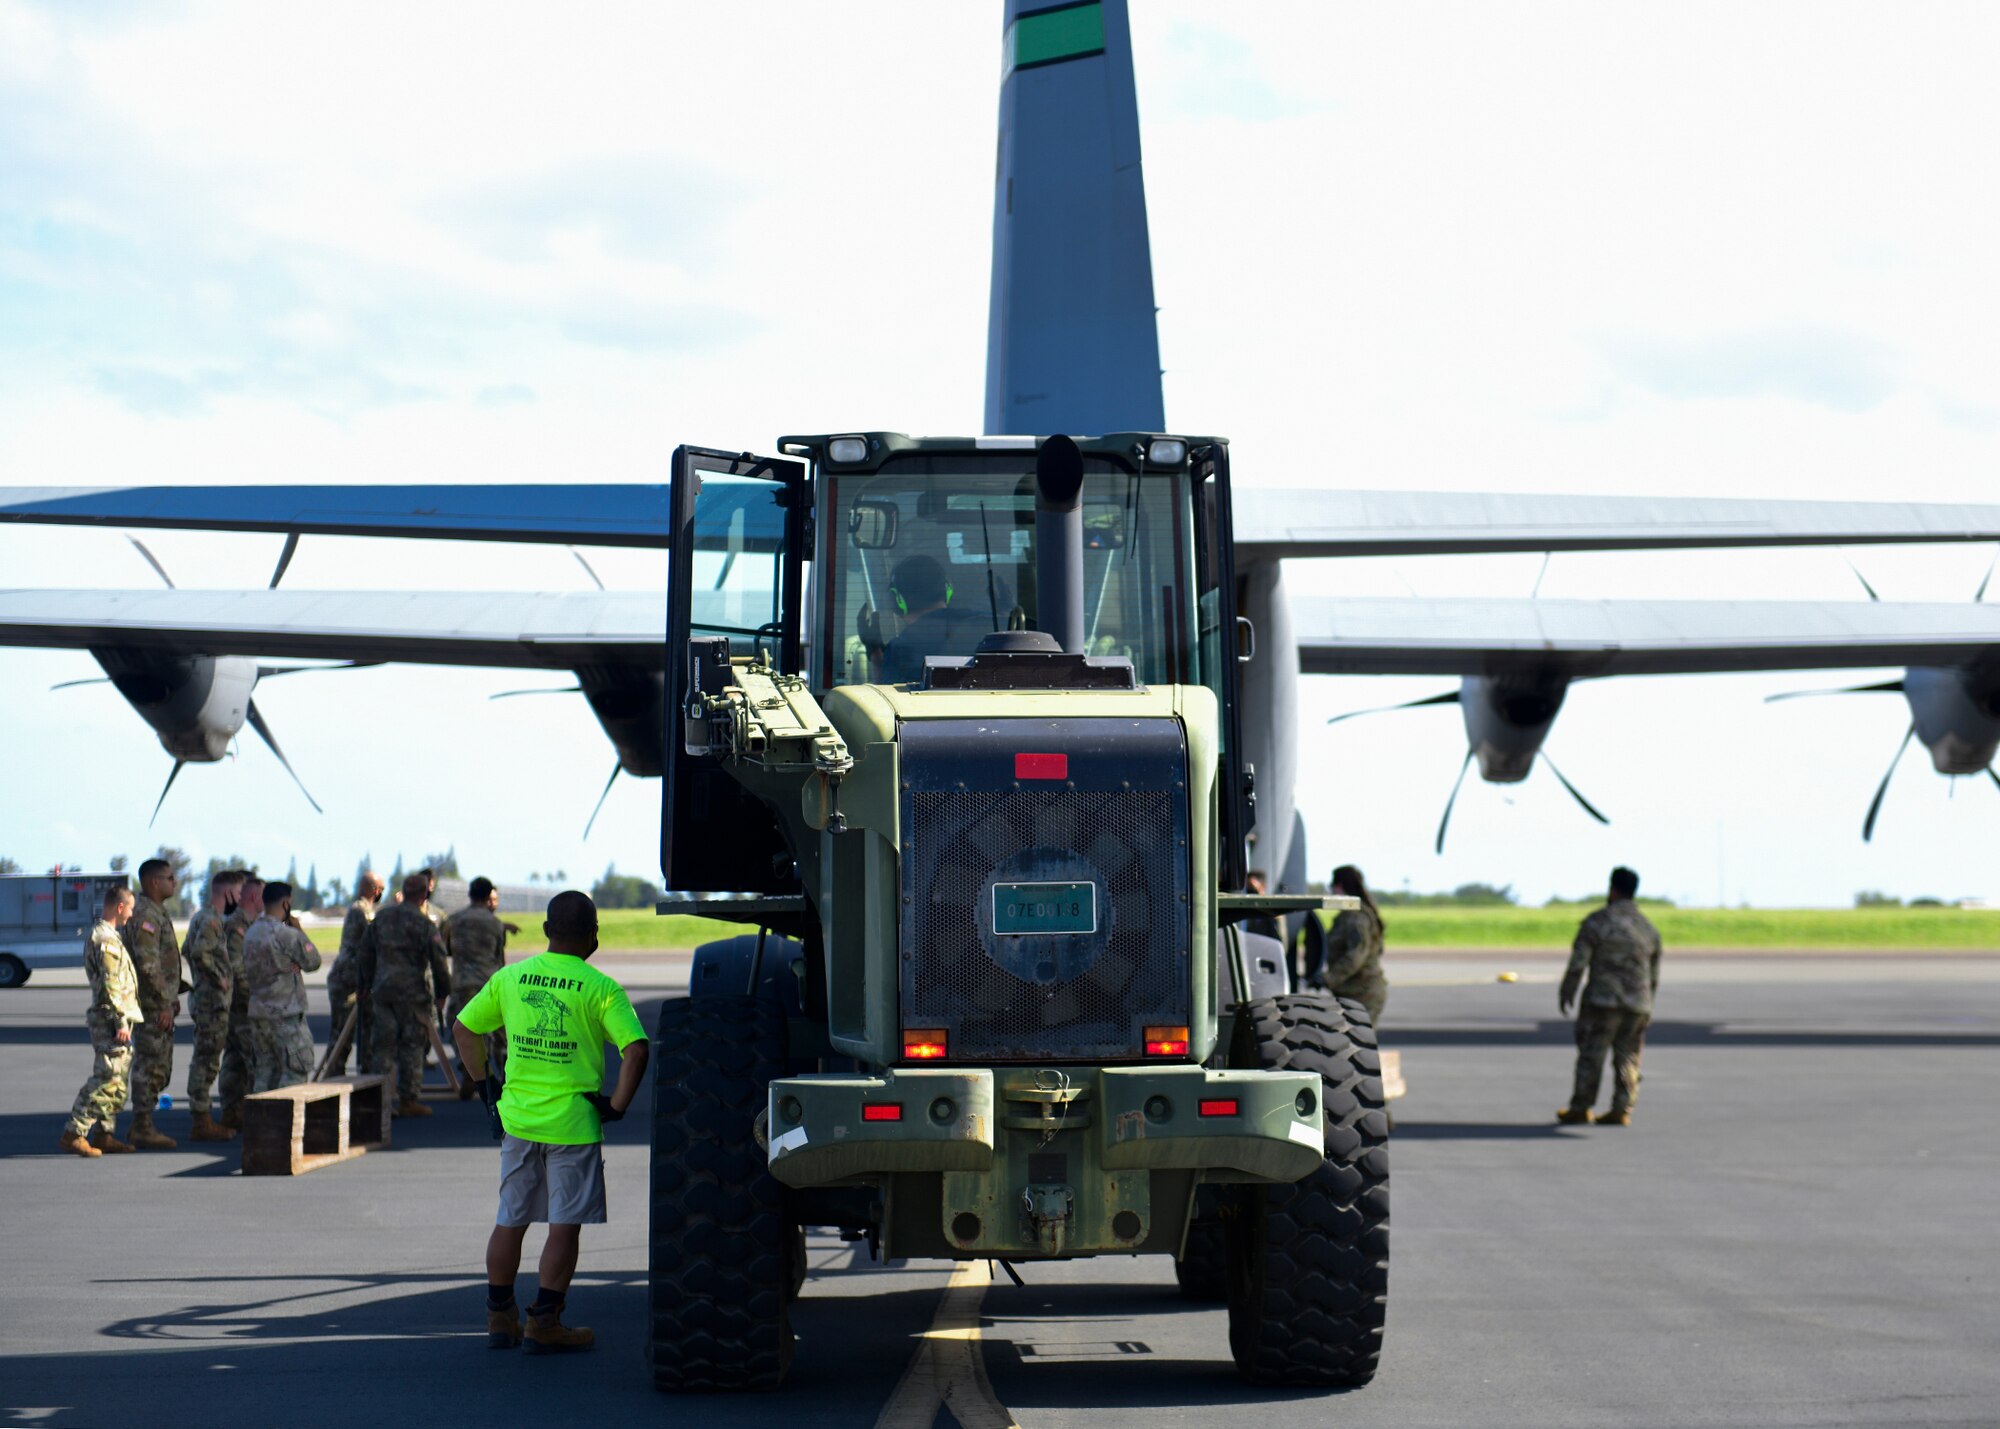 A forklift carries a M119 howitzer onto an aircraft